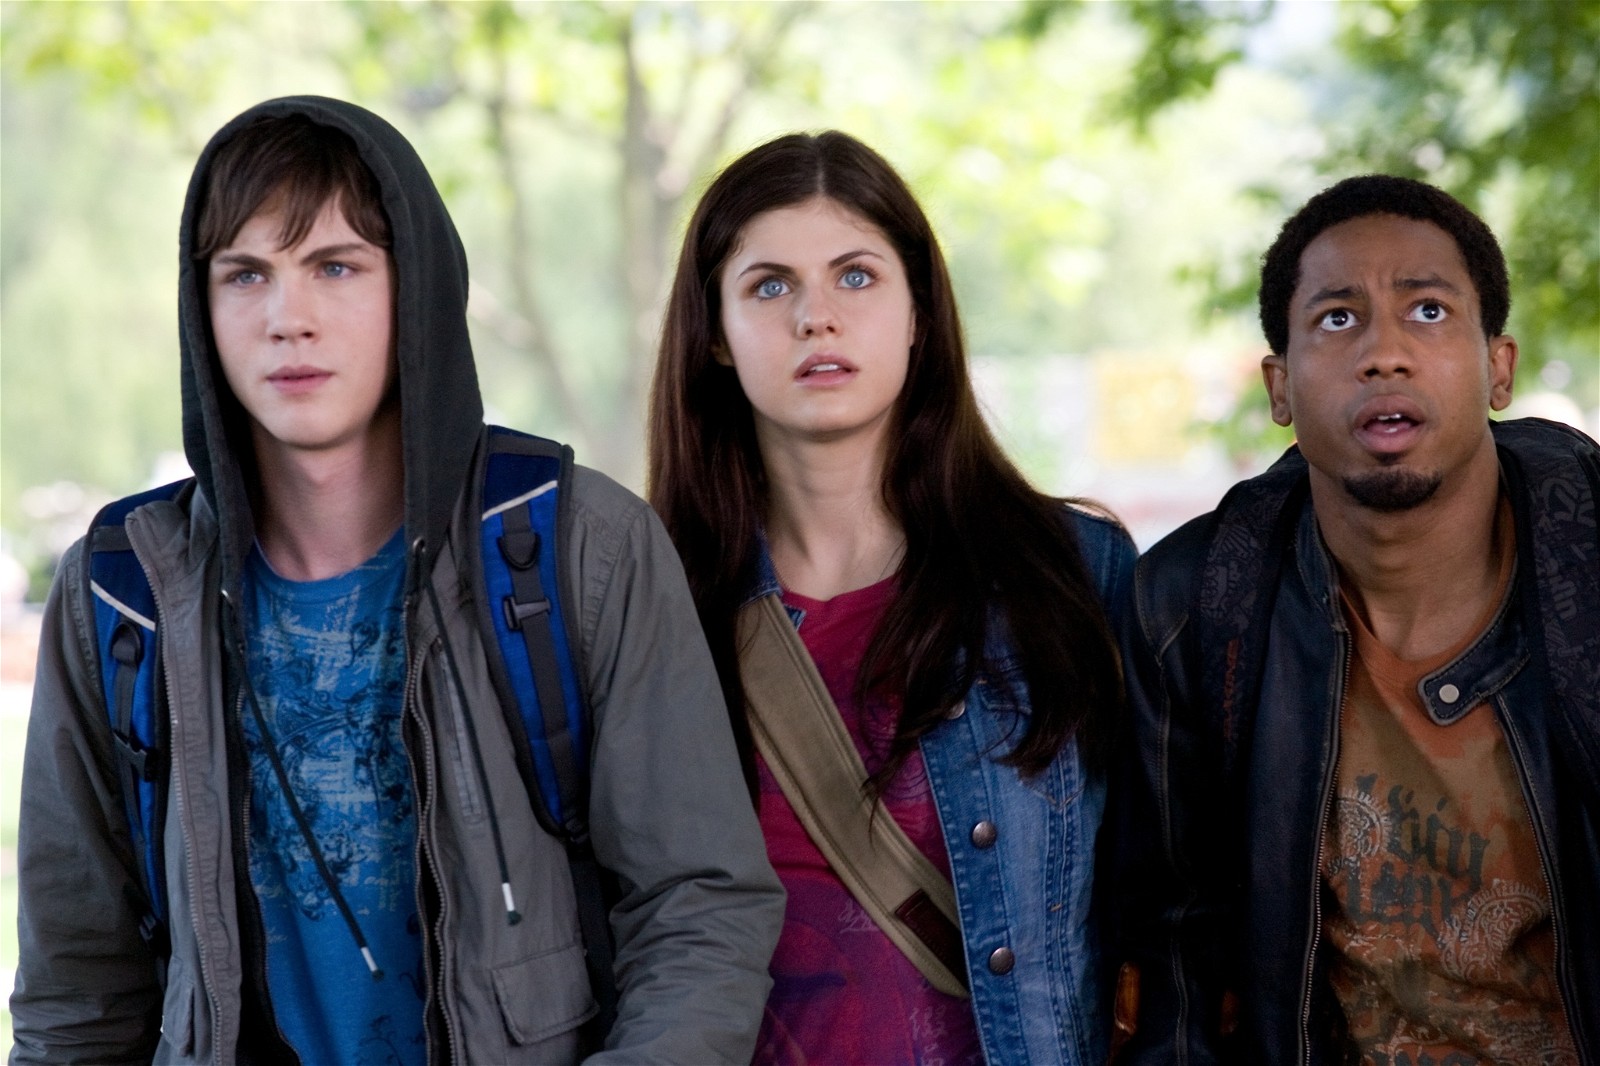 A still from Percy Jackson & the Olympians: The Lightning Thief